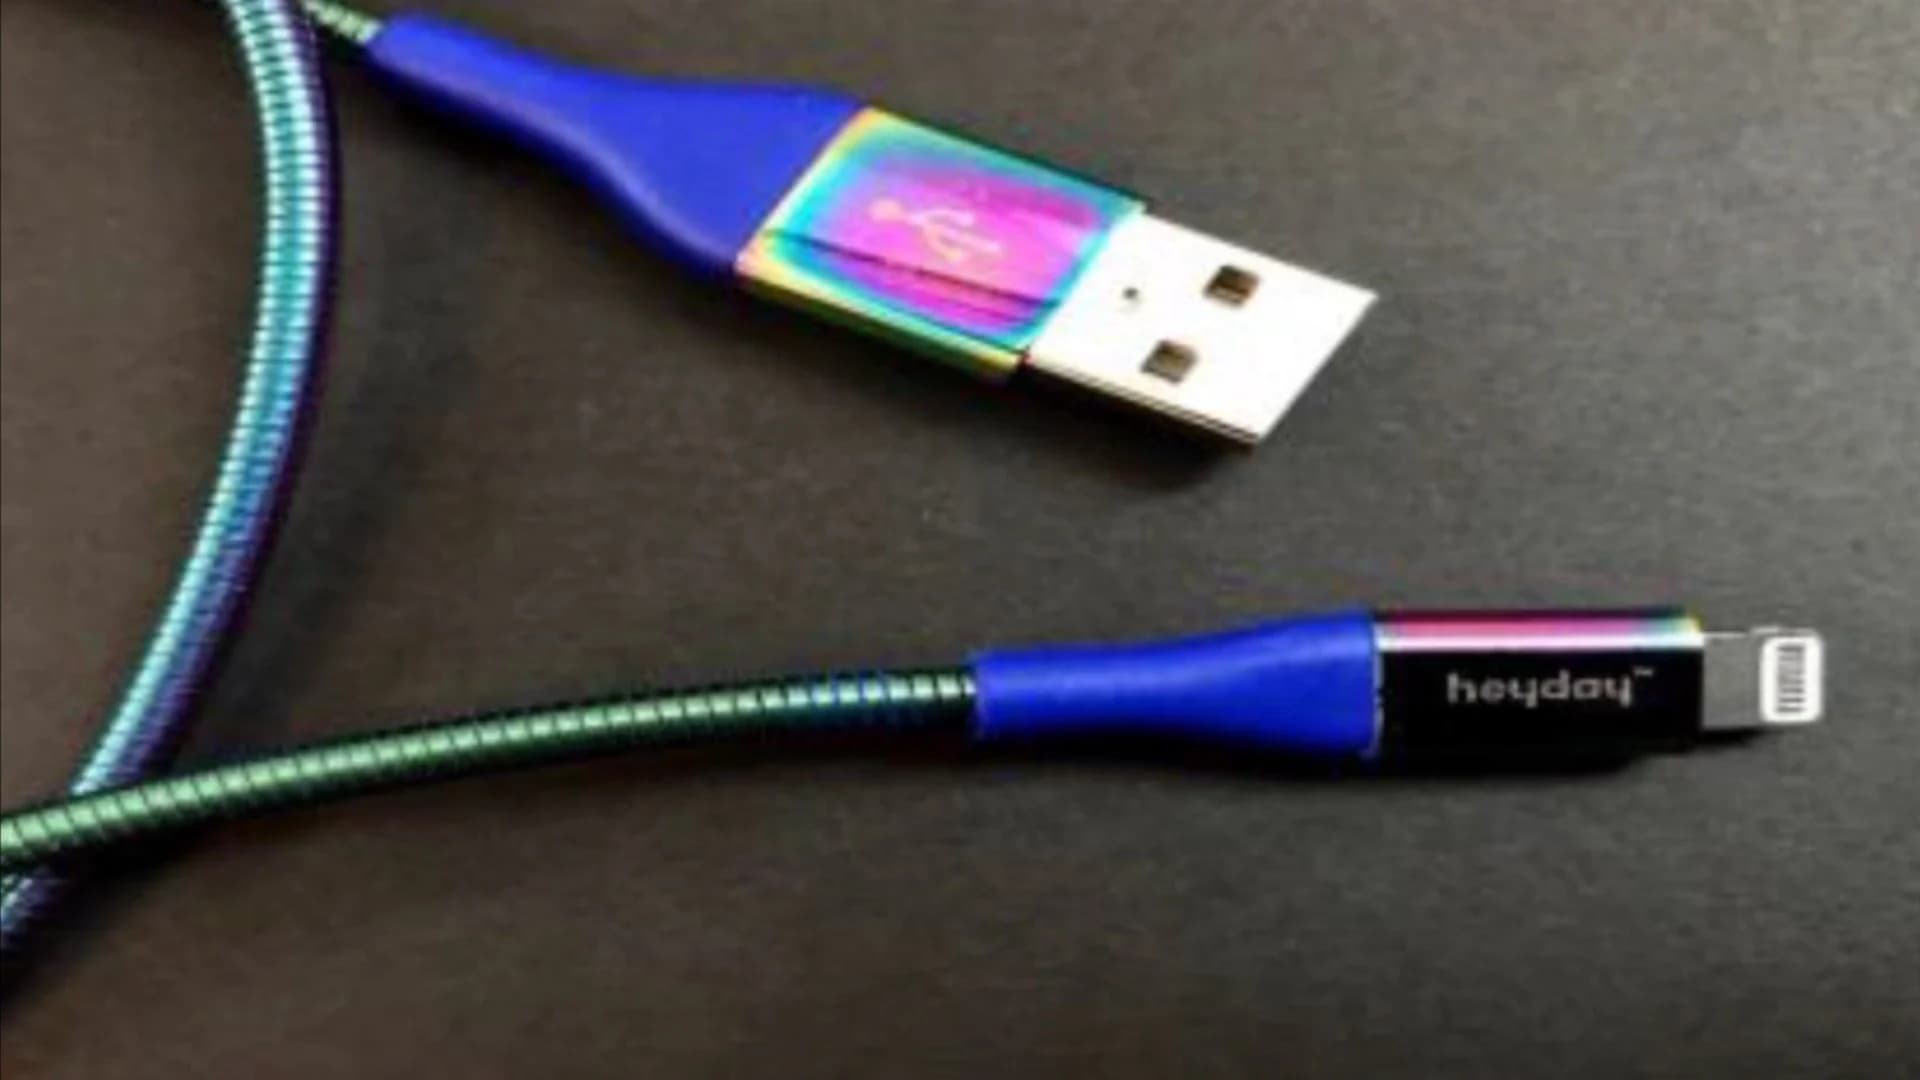 Target recalls around 90K USB charging cables due to shock, fire hazards